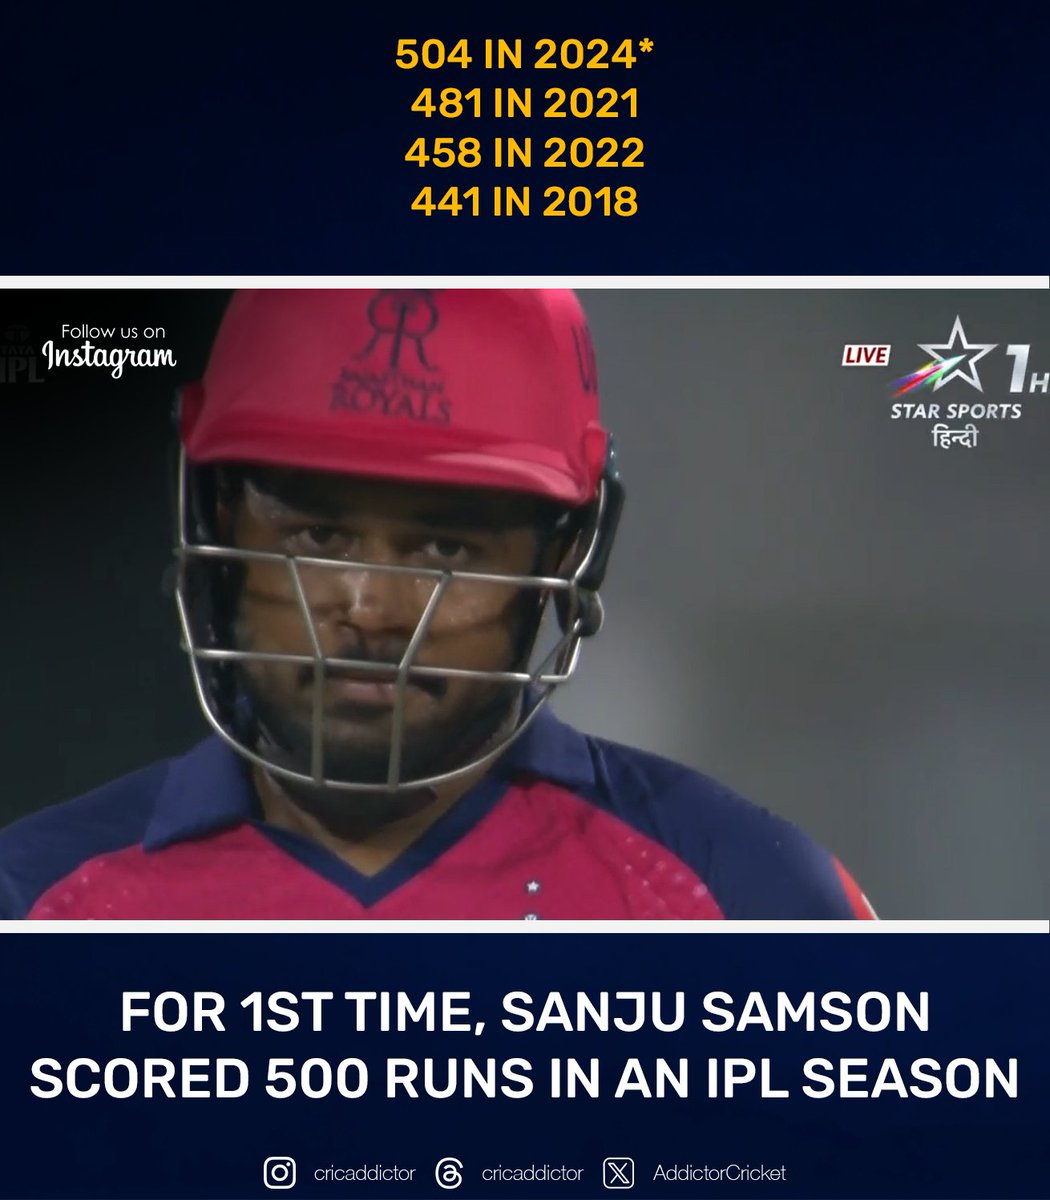 Sanju Samson is showcasing excellent form just in time for the T20 World Cup! #ICC #CRICKET #IPL24 #RR